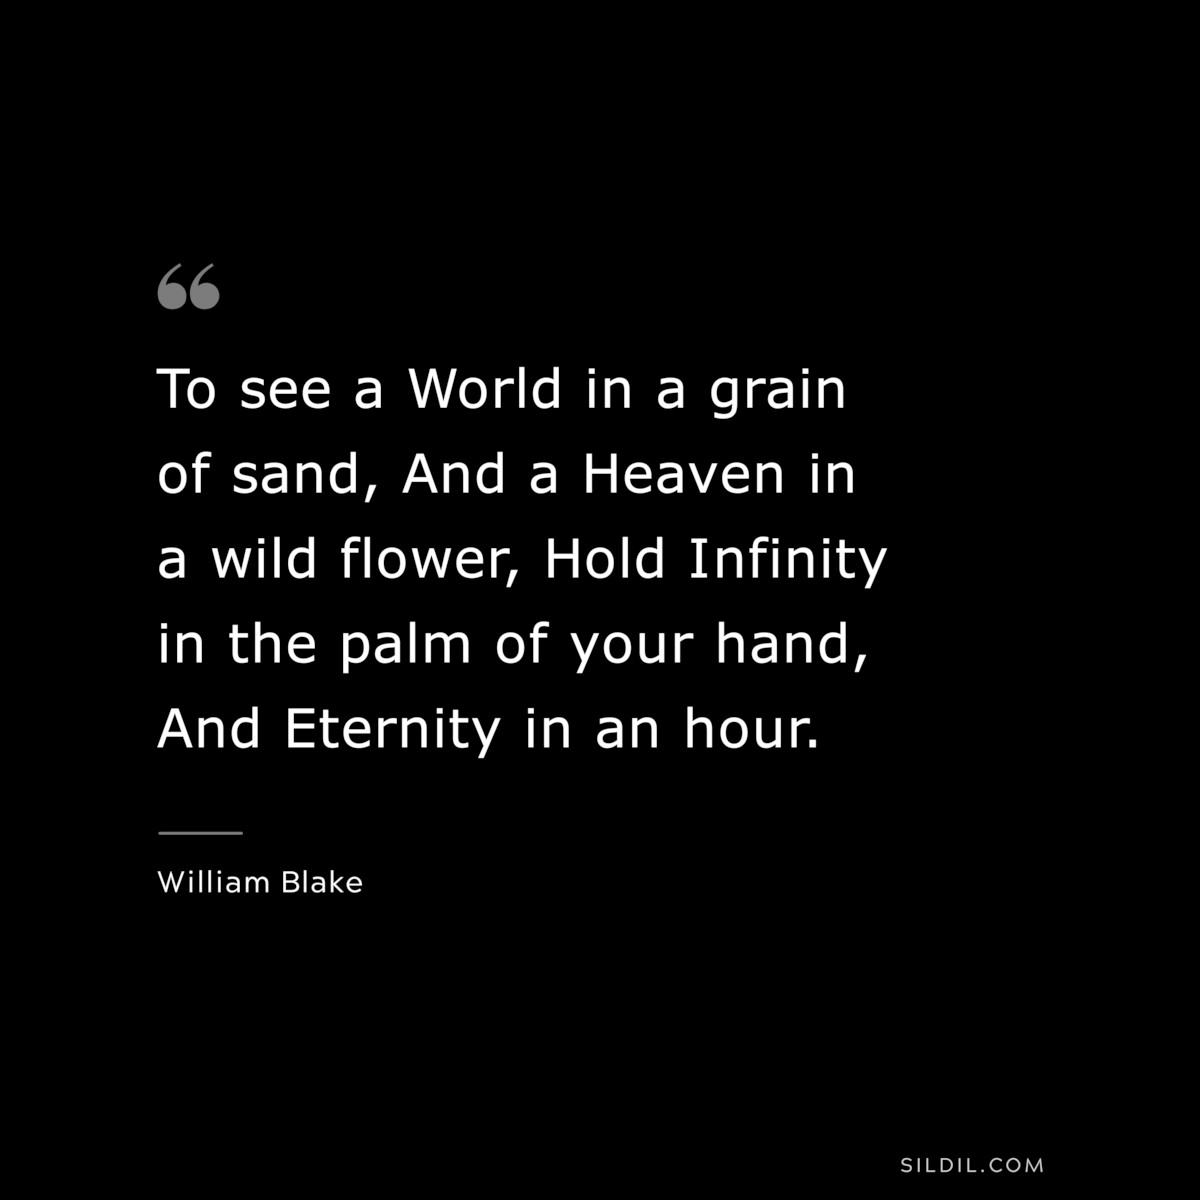 To see a World in a grain of sand, And a Heaven in a wild flower, Hold Infinity in the palm of your hand, And Eternity in an hour. ― William Blake